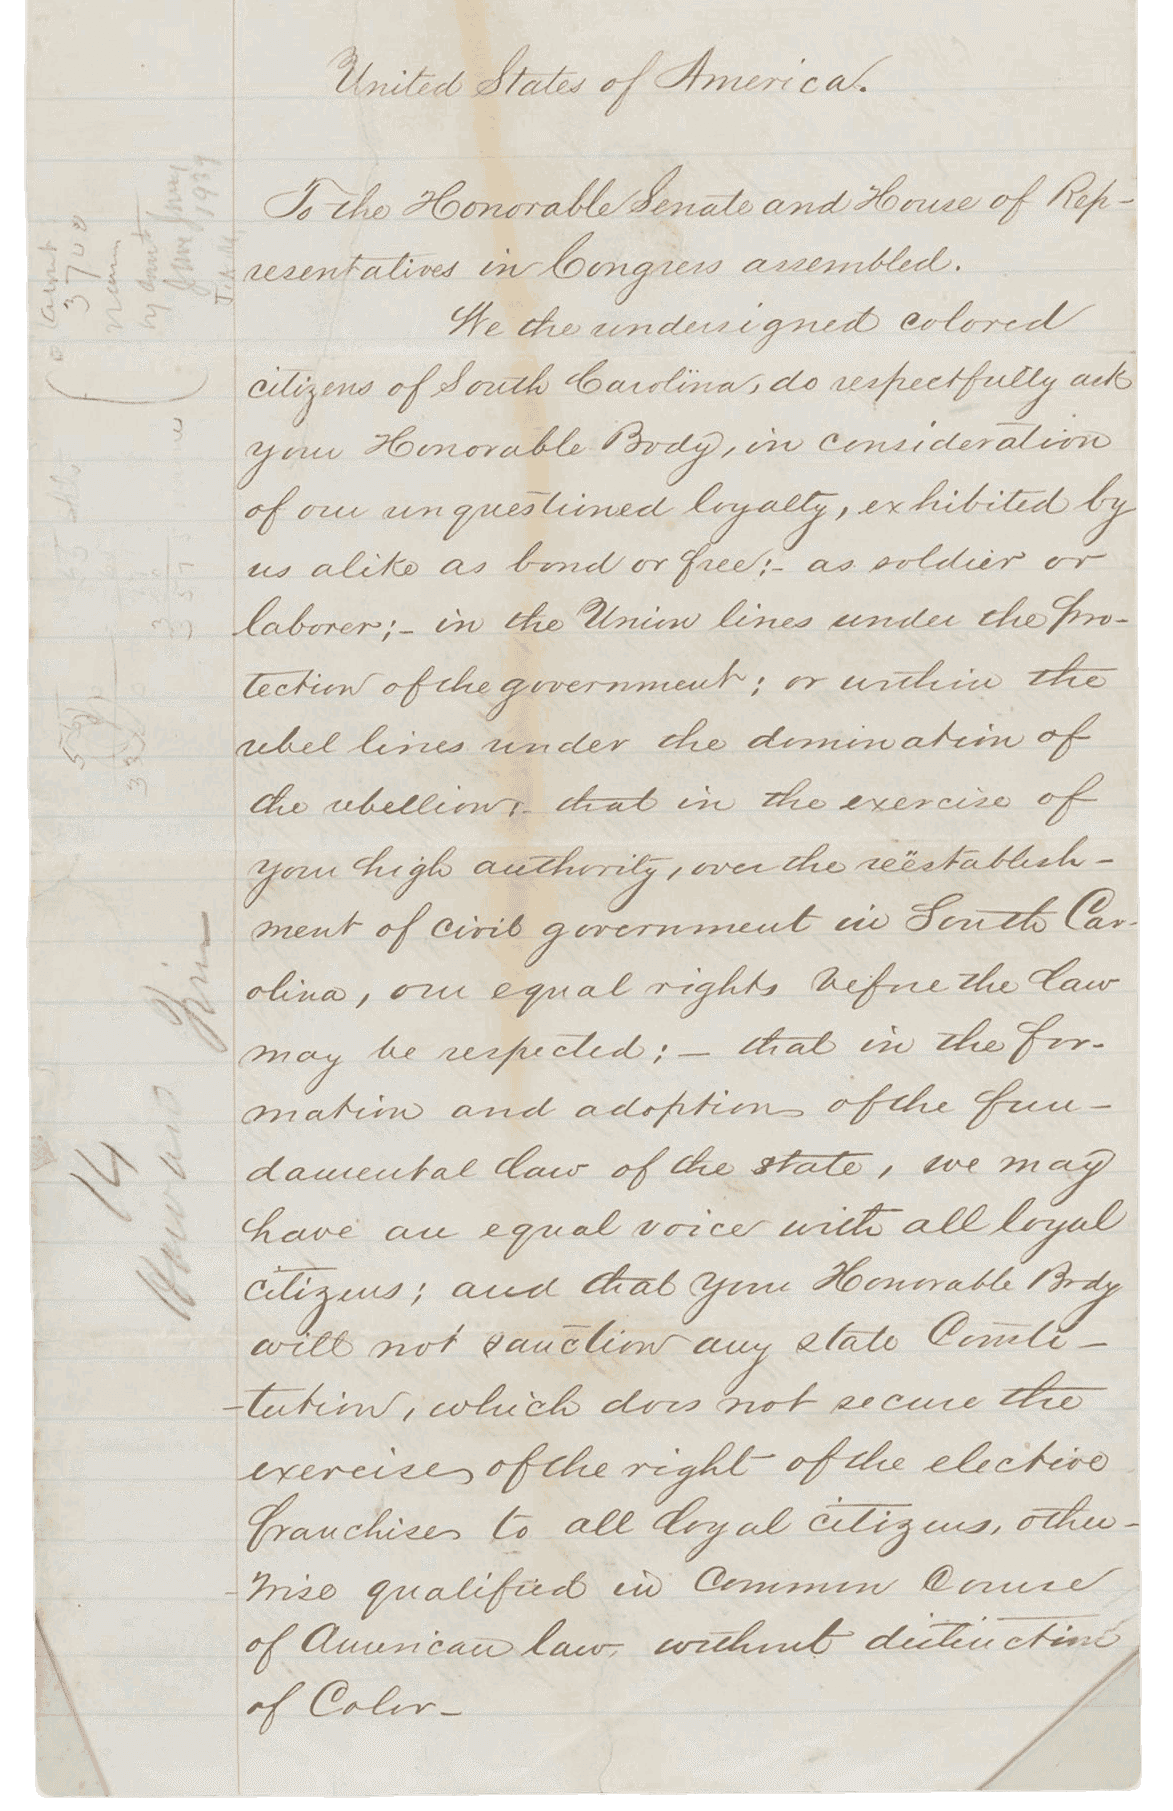 A long page of Petition of Colored Citizens of South Carolina with faded handwriting.